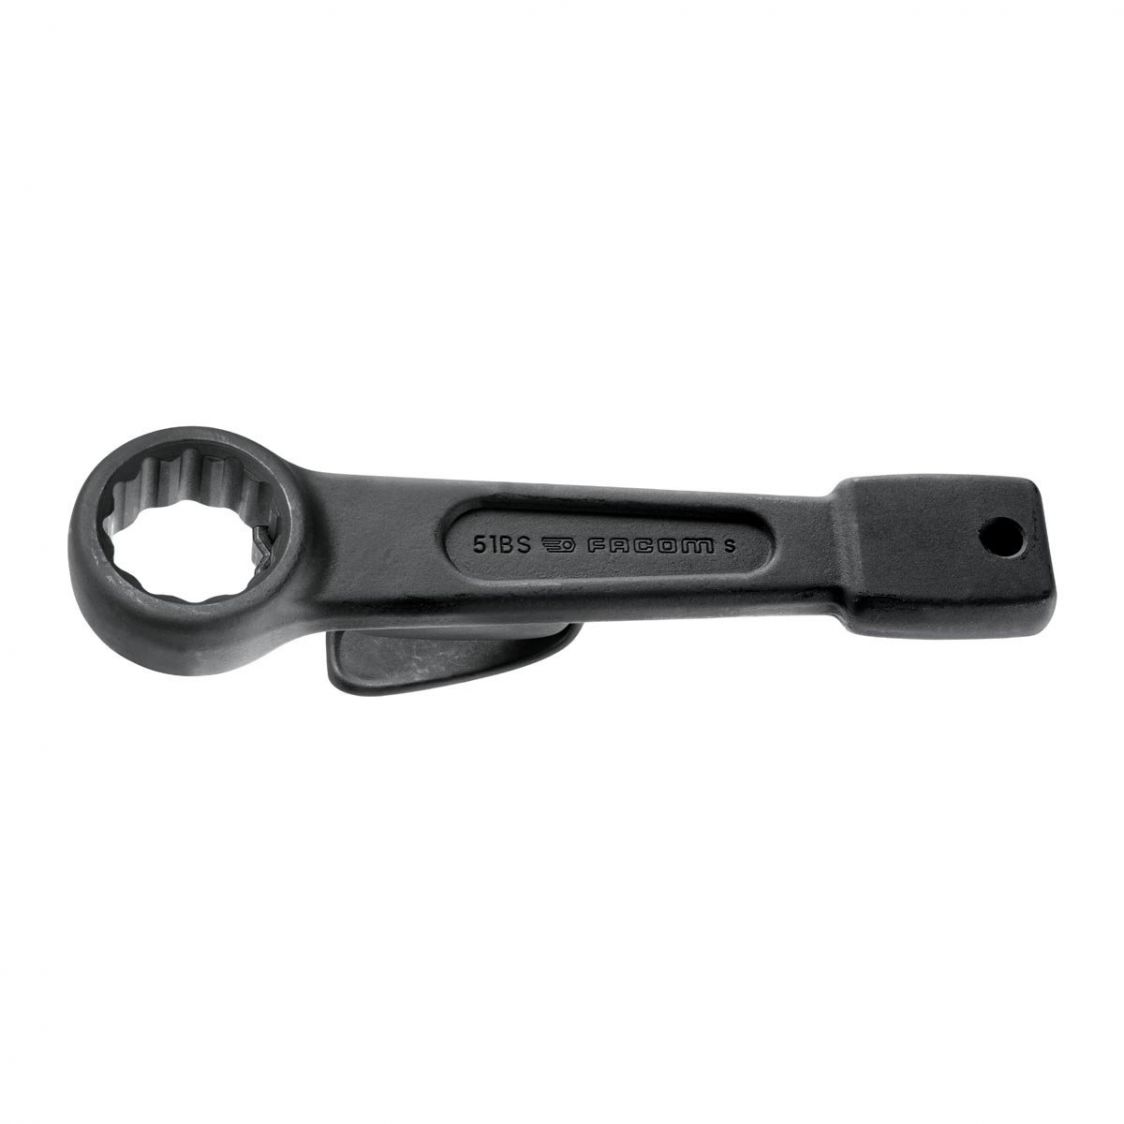 FACOM 51BS.27 - 27mm Metric Safety Impact Slogging Ring Spanner